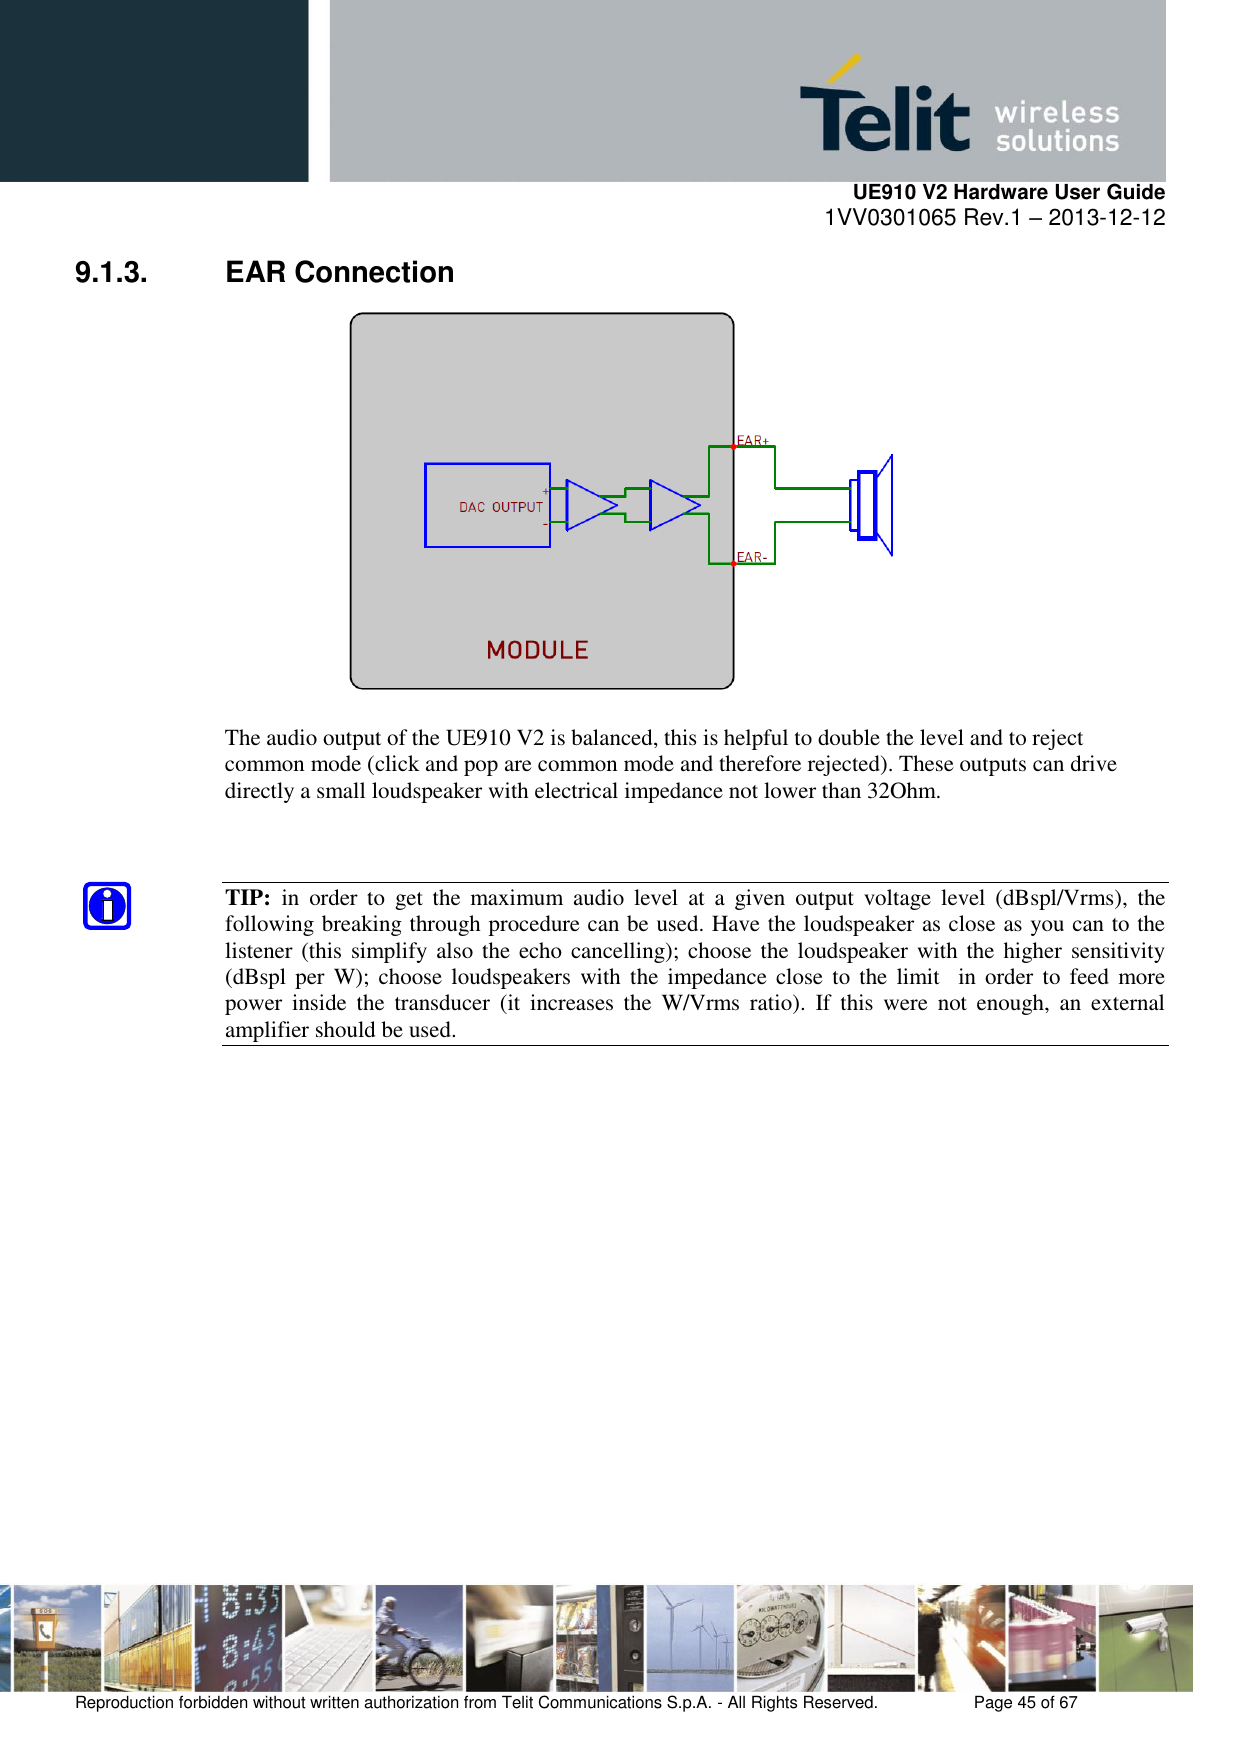     UE910 V2 Hardware User Guide 1VV0301065 Rev.1 – 2013-12-12  Reproduction forbidden without written authorization from Telit Communications S.p.A. - All Rights Reserved.    Page 45 of 67                                                     9.1.3.  EAR Connection   The audio output of the UE910 V2 is balanced, this is helpful to double the level and to reject common mode (click and pop are common mode and therefore rejected). These outputs can drive directly a small loudspeaker with electrical impedance not lower than 32Ohm.   TIP:  in  order  to  get  the  maximum  audio  level  at  a  given  output  voltage  level  (dBspl/Vrms),  the following breaking through procedure can be used. Have the loudspeaker as close as you can to the listener (this  simplify also the echo cancelling); choose the loudspeaker with the  higher sensitivity (dBspl per  W);  choose loudspeakers with the  impedance close to  the  limit   in order to  feed more power  inside  the  transducer  (it  increases  the  W/Vrms  ratio).  If  this  were  not  enough,  an  external amplifier should be used.                  